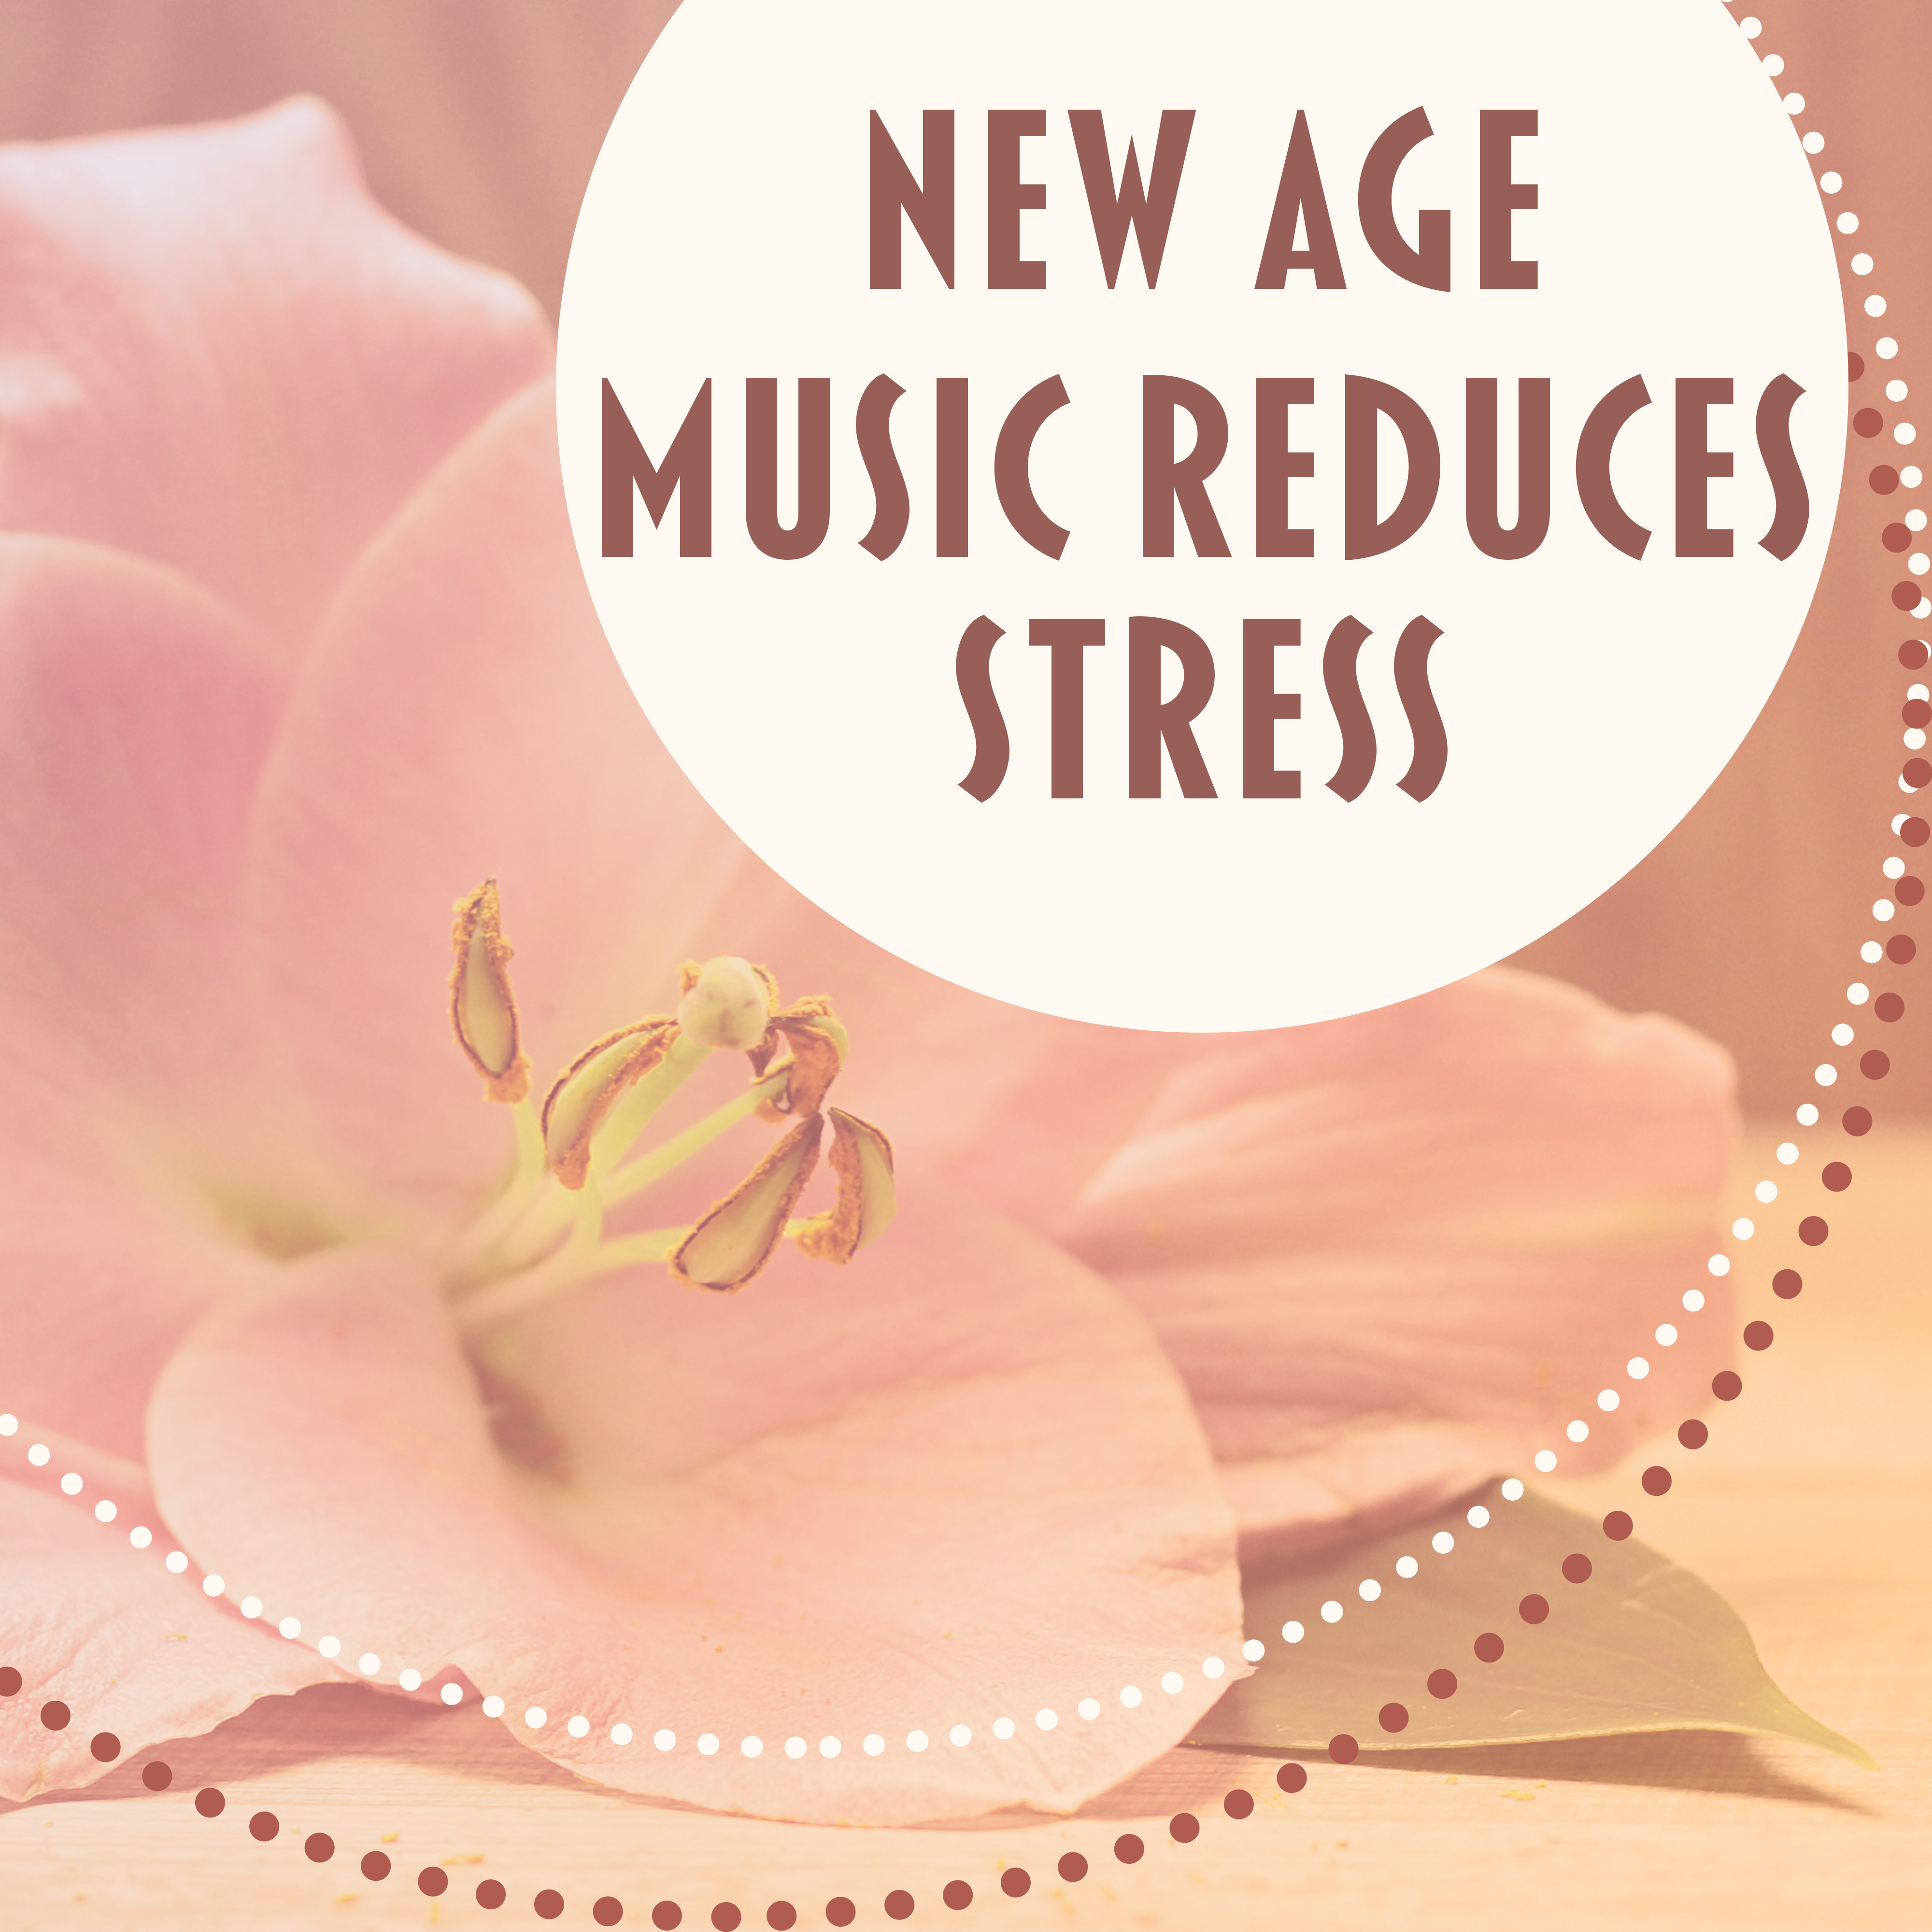 New Age Music Reduces Stress  Relaxation Sounds for Spa, Massage, Wellness, Deep Relief, Spa Dreams, Pure Mind, Peaceful Music